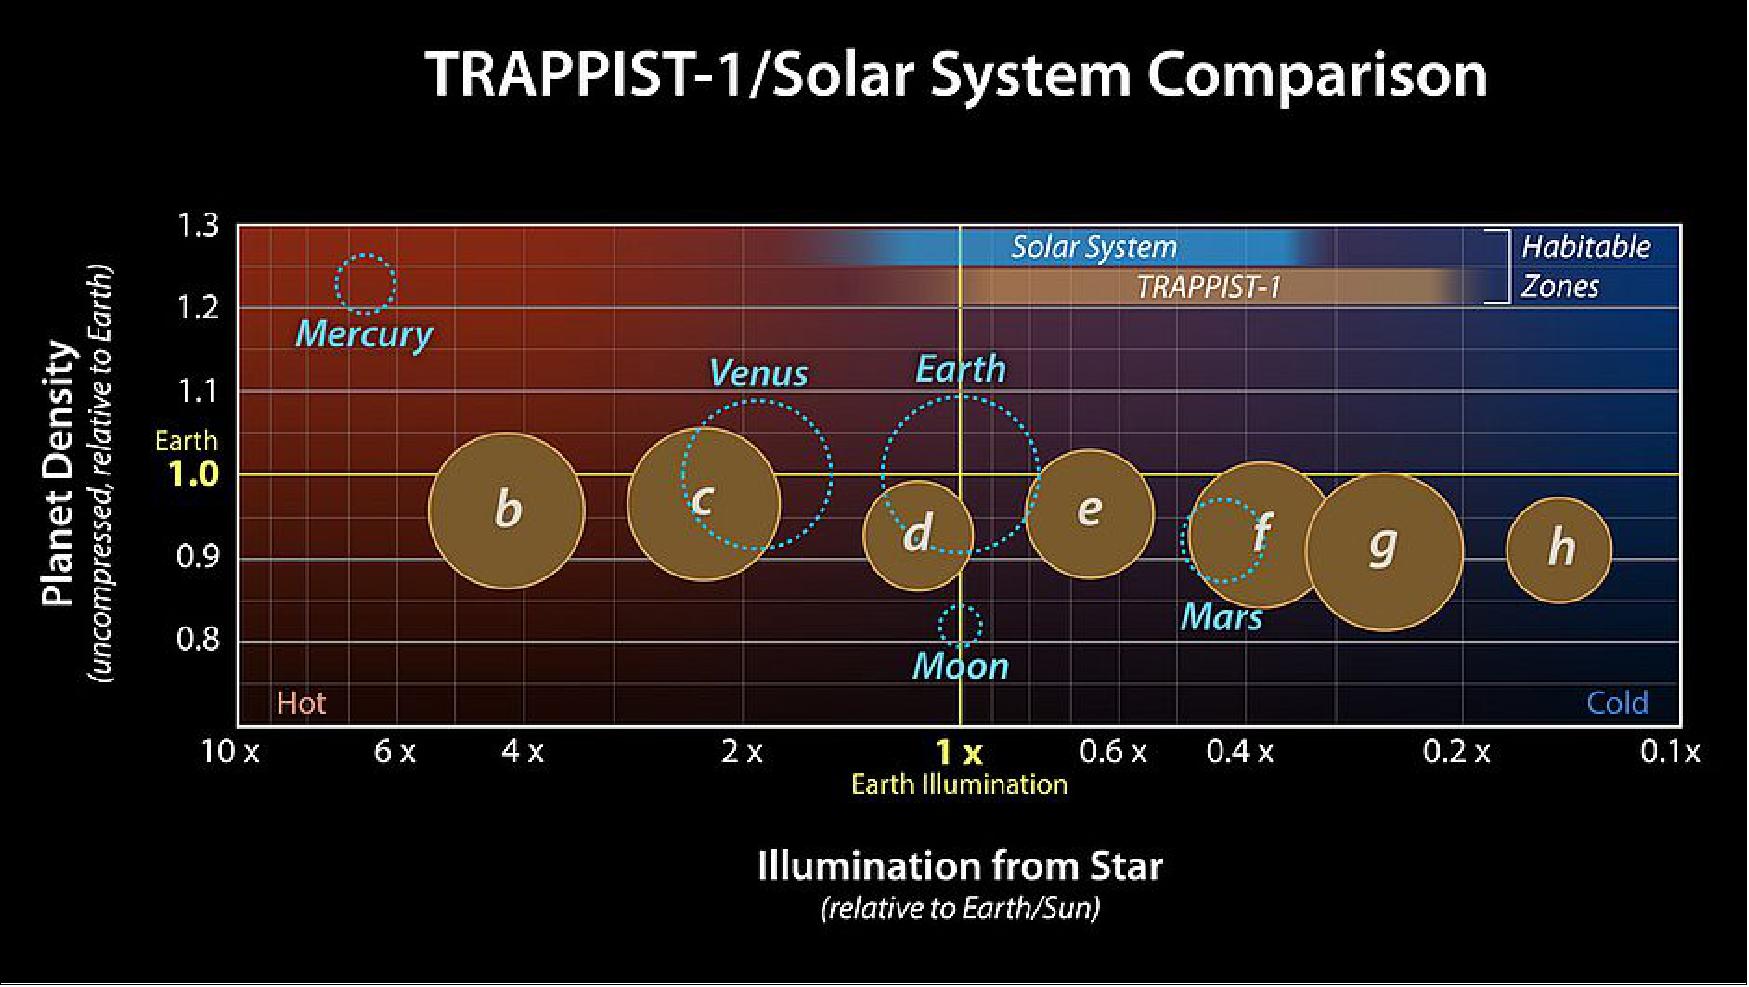 Figure 17: A planet’s density is determined by its composition as well as its size: Gravity compresses the material a planet is made of, increasing the planet’s density. Uncompressed density adjusts for the effect of gravity and can reveal how the composition of various planets compare (image credit: NASA/JPL-Caltech)